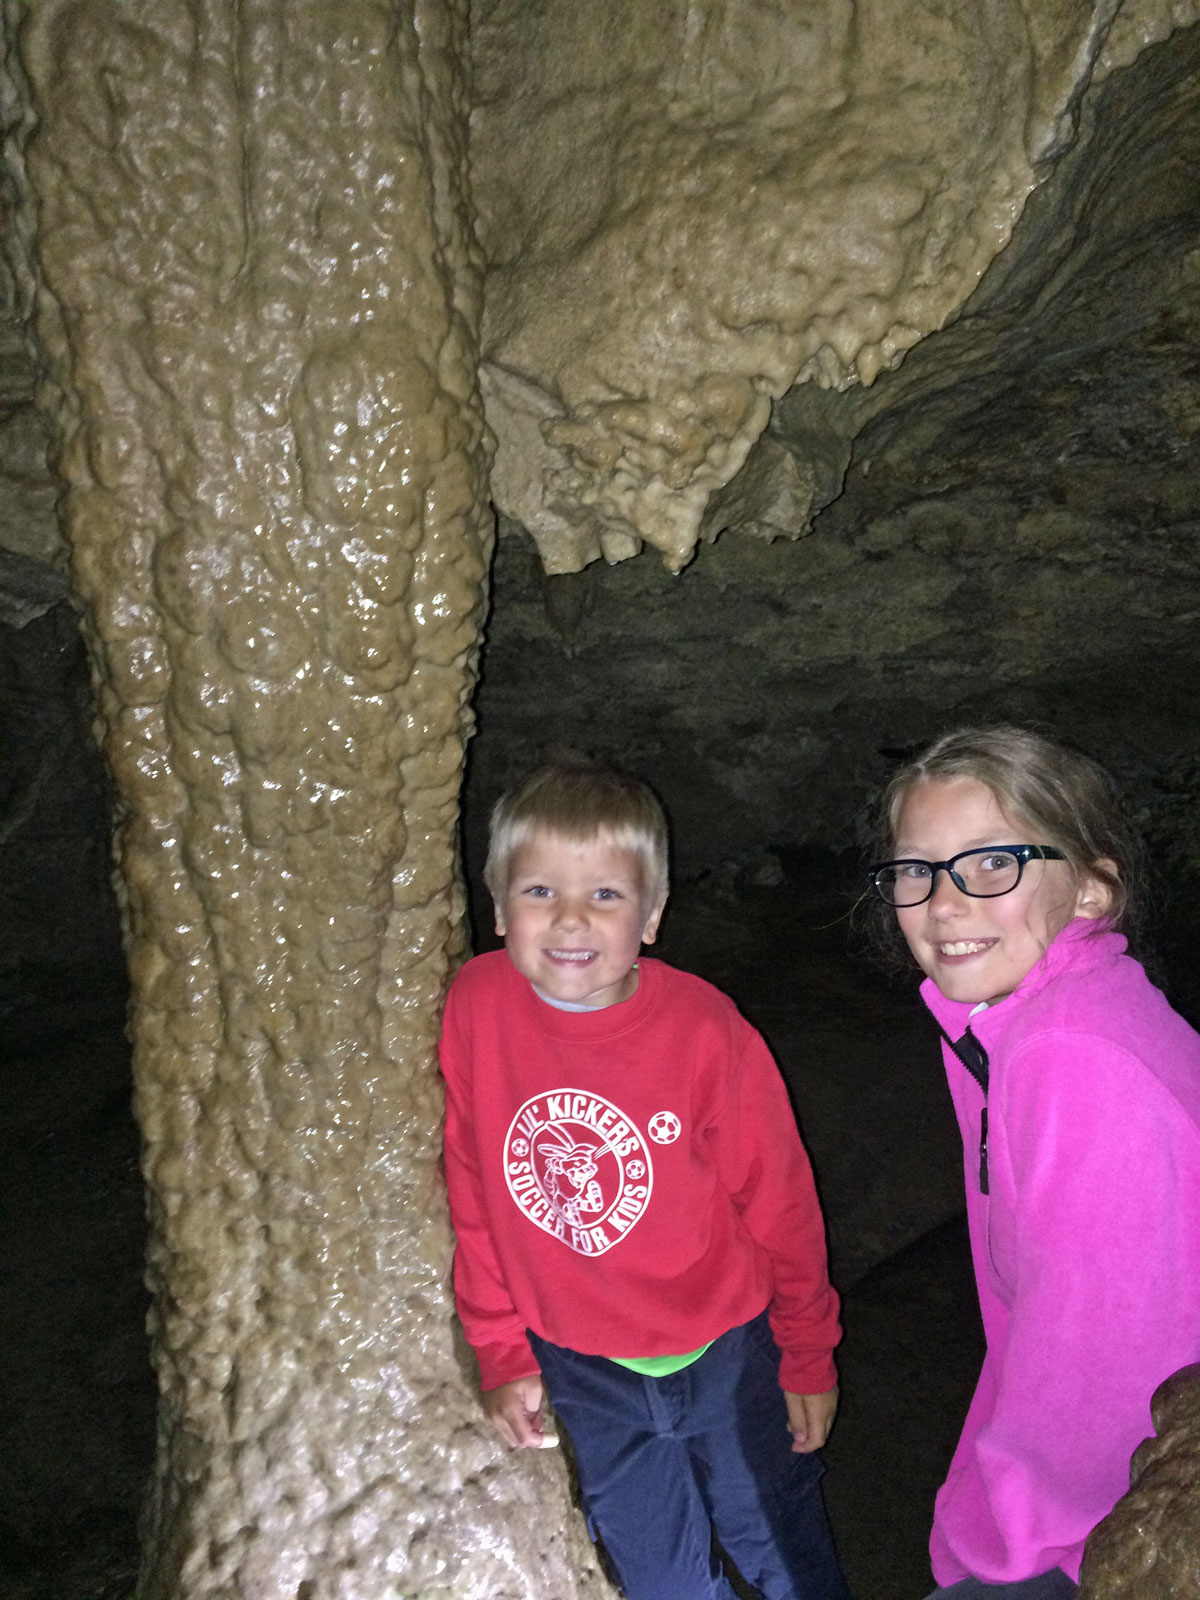 A single stalactite can be touched by visitors in the Oregon Caves.